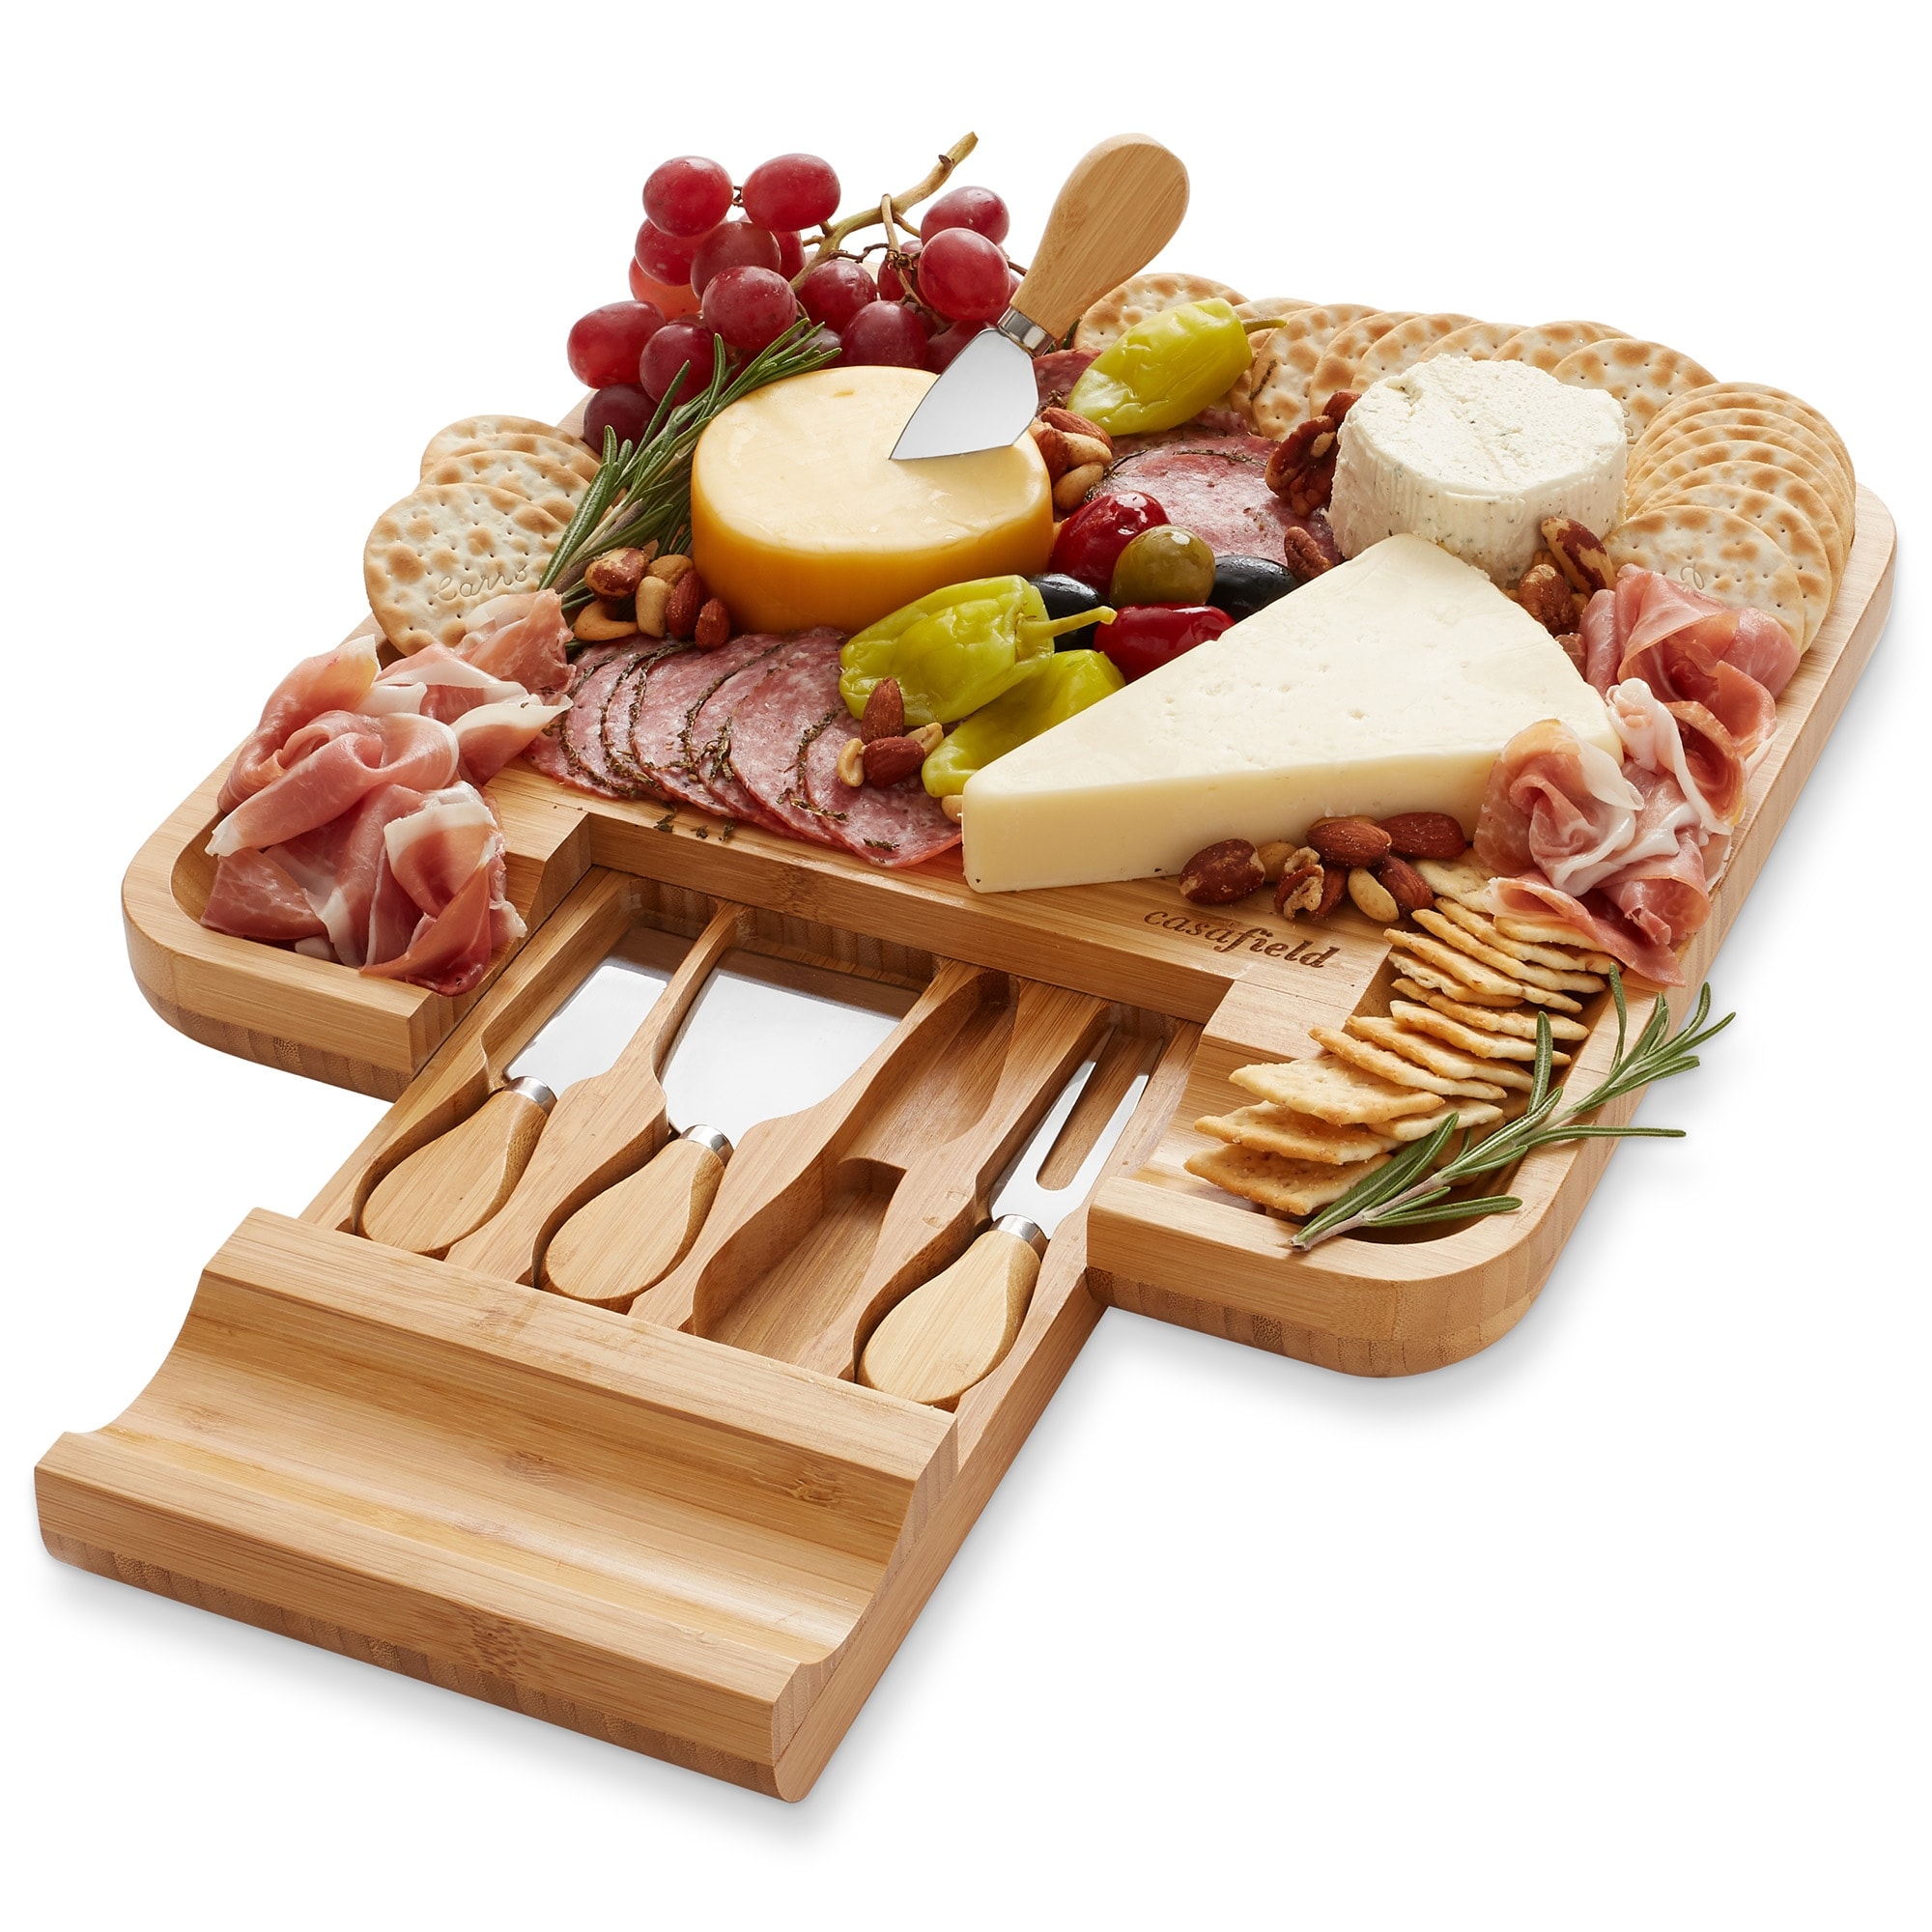 https://ak1.ostkcdn.com/images/products/is/images/direct/9bedf545c1ab90ff40611923f6637572f8774321/Bamboo-Cheese-Board-%26-Knife-Gift-Set%2C-Charcuterie-Serving-Tray.jpg